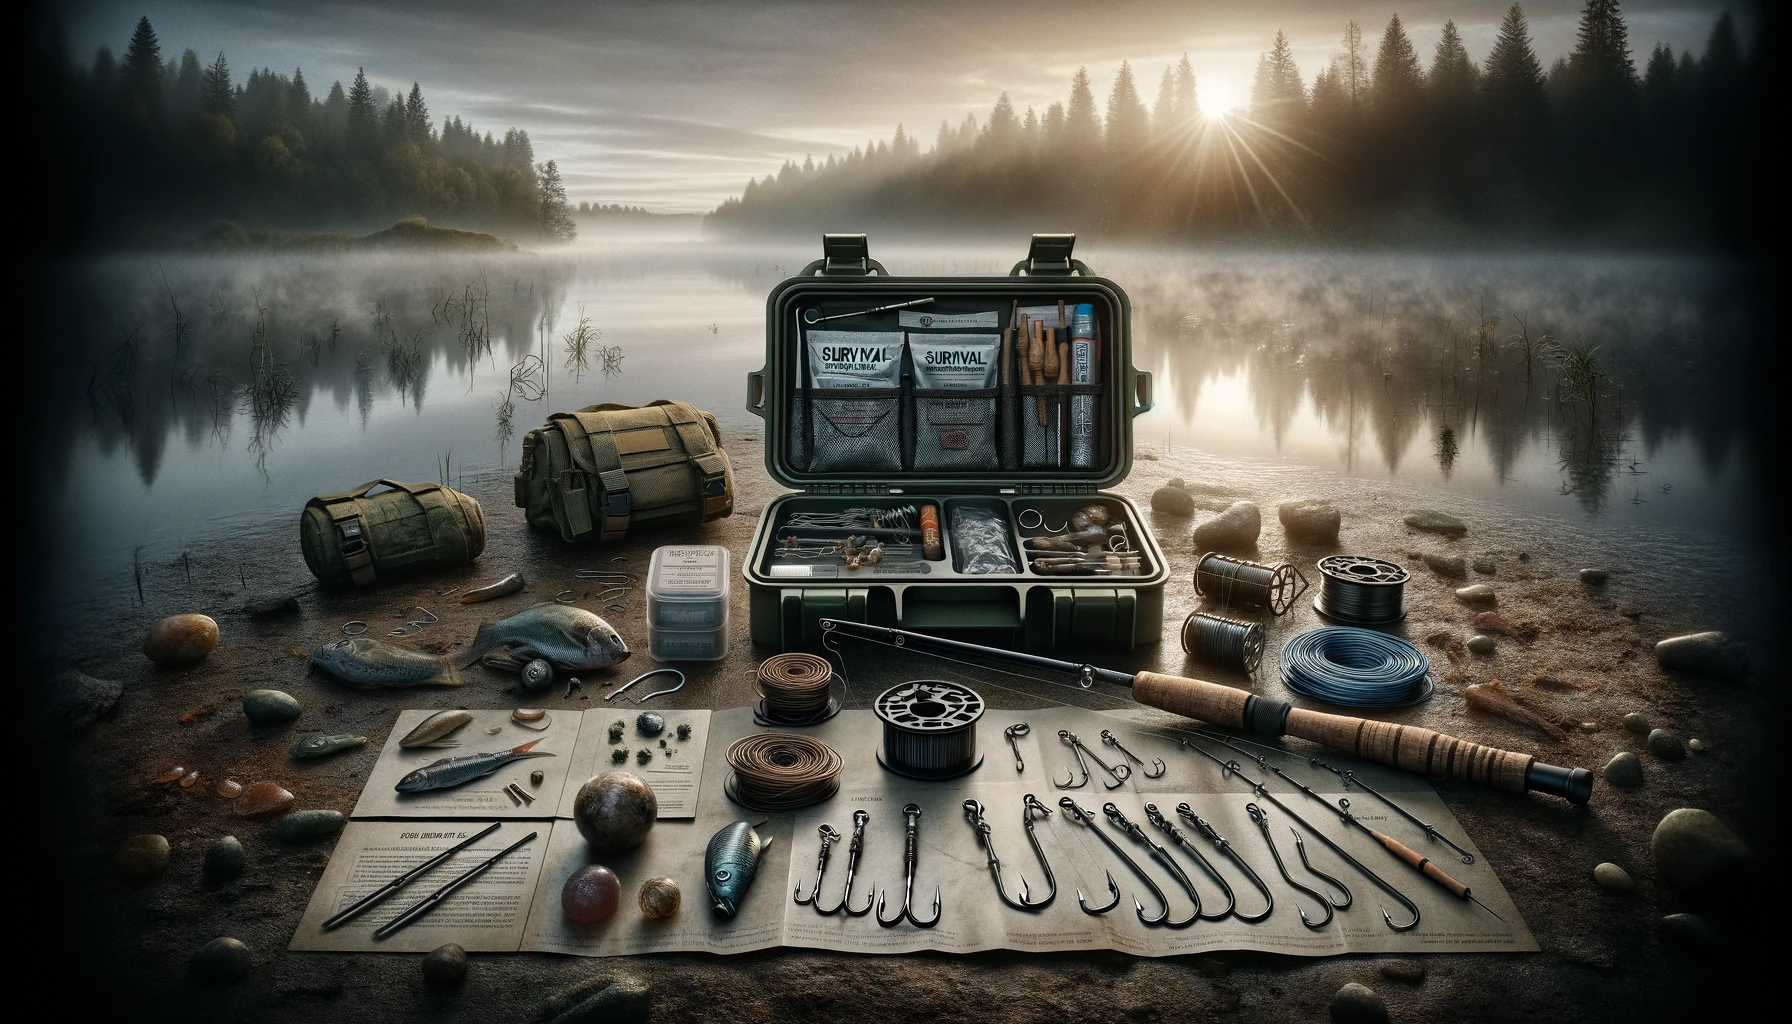 Survival fishing kit essentials displayed on a rugged terrain by a serene lakeside at dawn, including hooks, sinkers, fishing line, disassemblable rod, baits, and a survival fishing techniques booklet, emphasizing preparedness and self-sufficiency